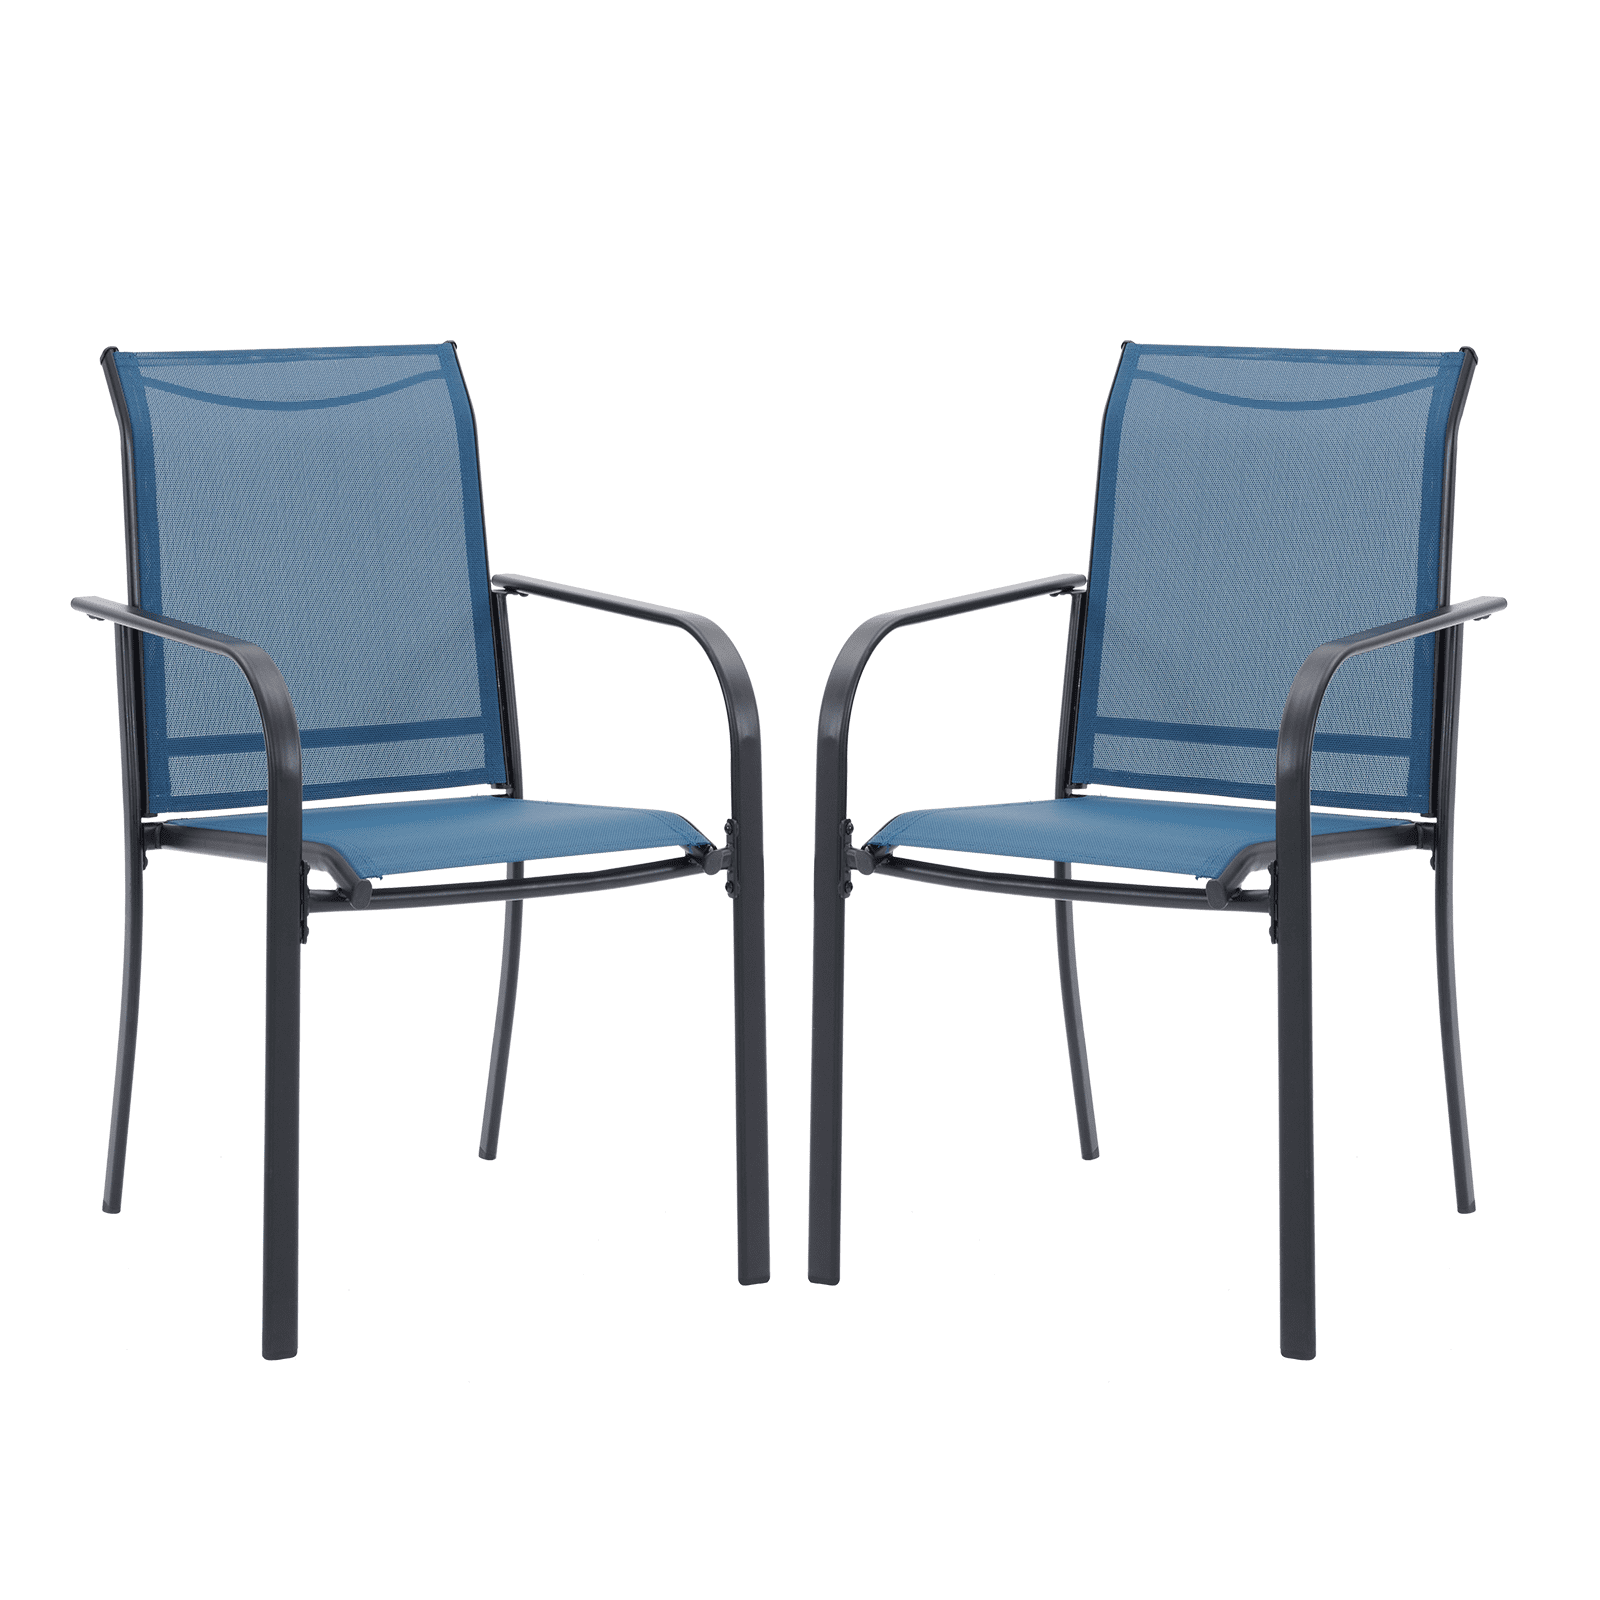 Vicllax Outdoor Stackable Sling Dining Chair with Armrest, Set of 2/4/6/8